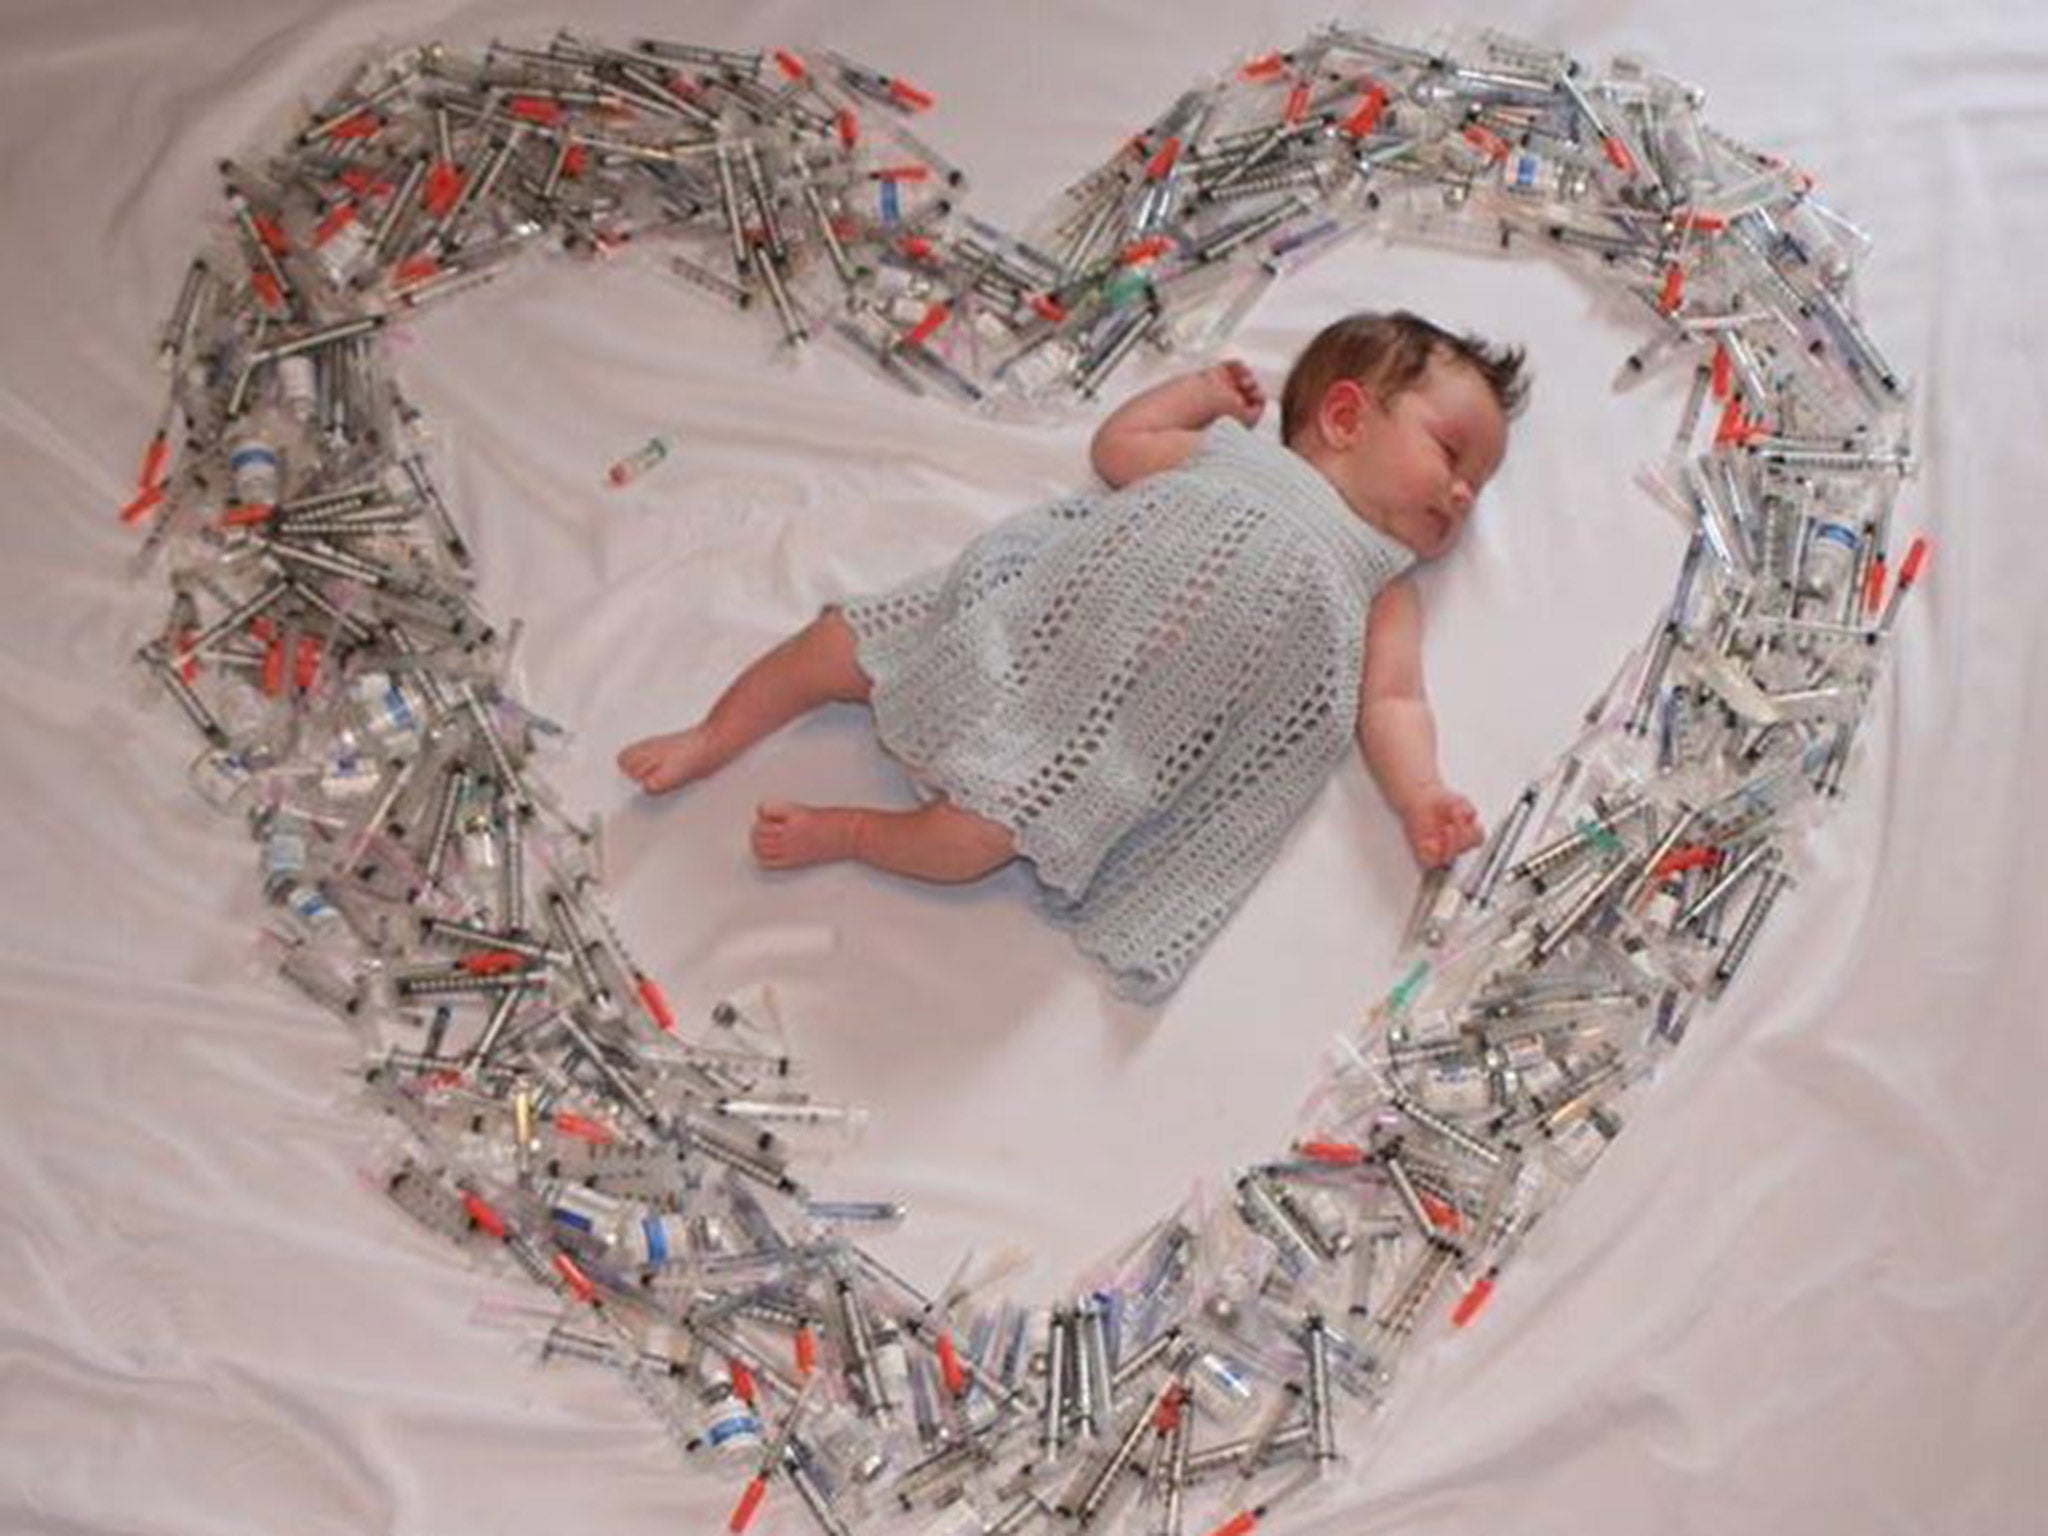 mum-s-picture-of-ivf-baby-surrounded-by-syringes-goes-viral-the